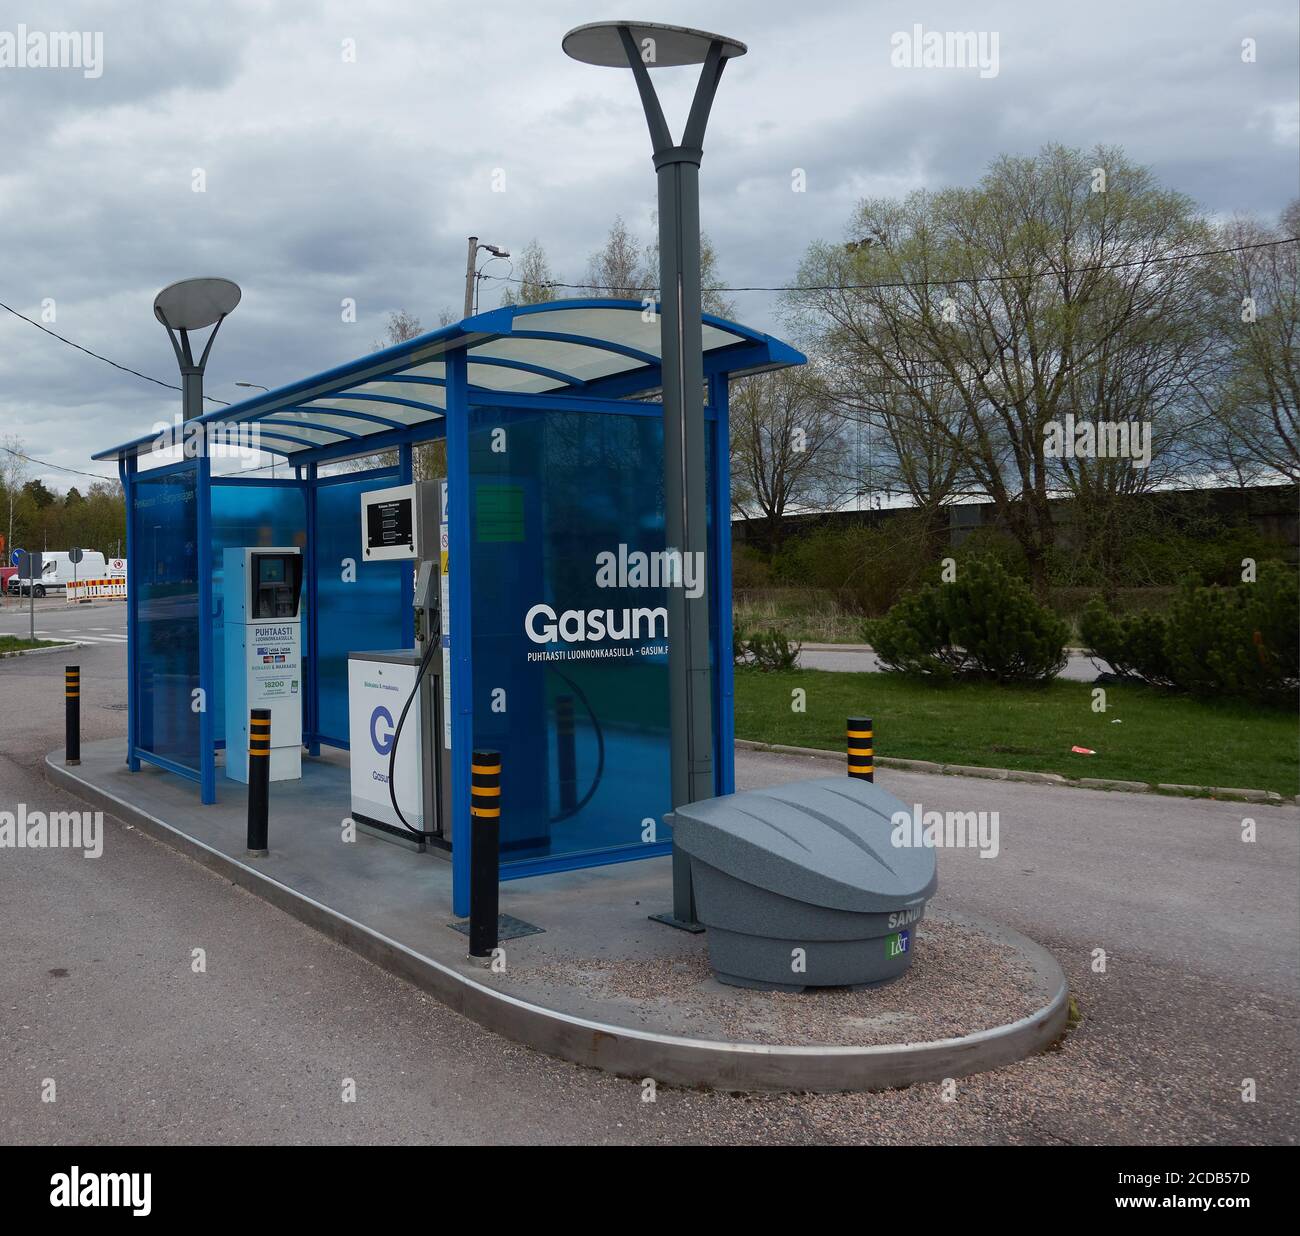 Espoo, Finland - May 6, 2020: Gasum gas company unmanned compressed natural gas (CNG) dispenser for cars that are able to utilize liquified natural ga Stock Photo